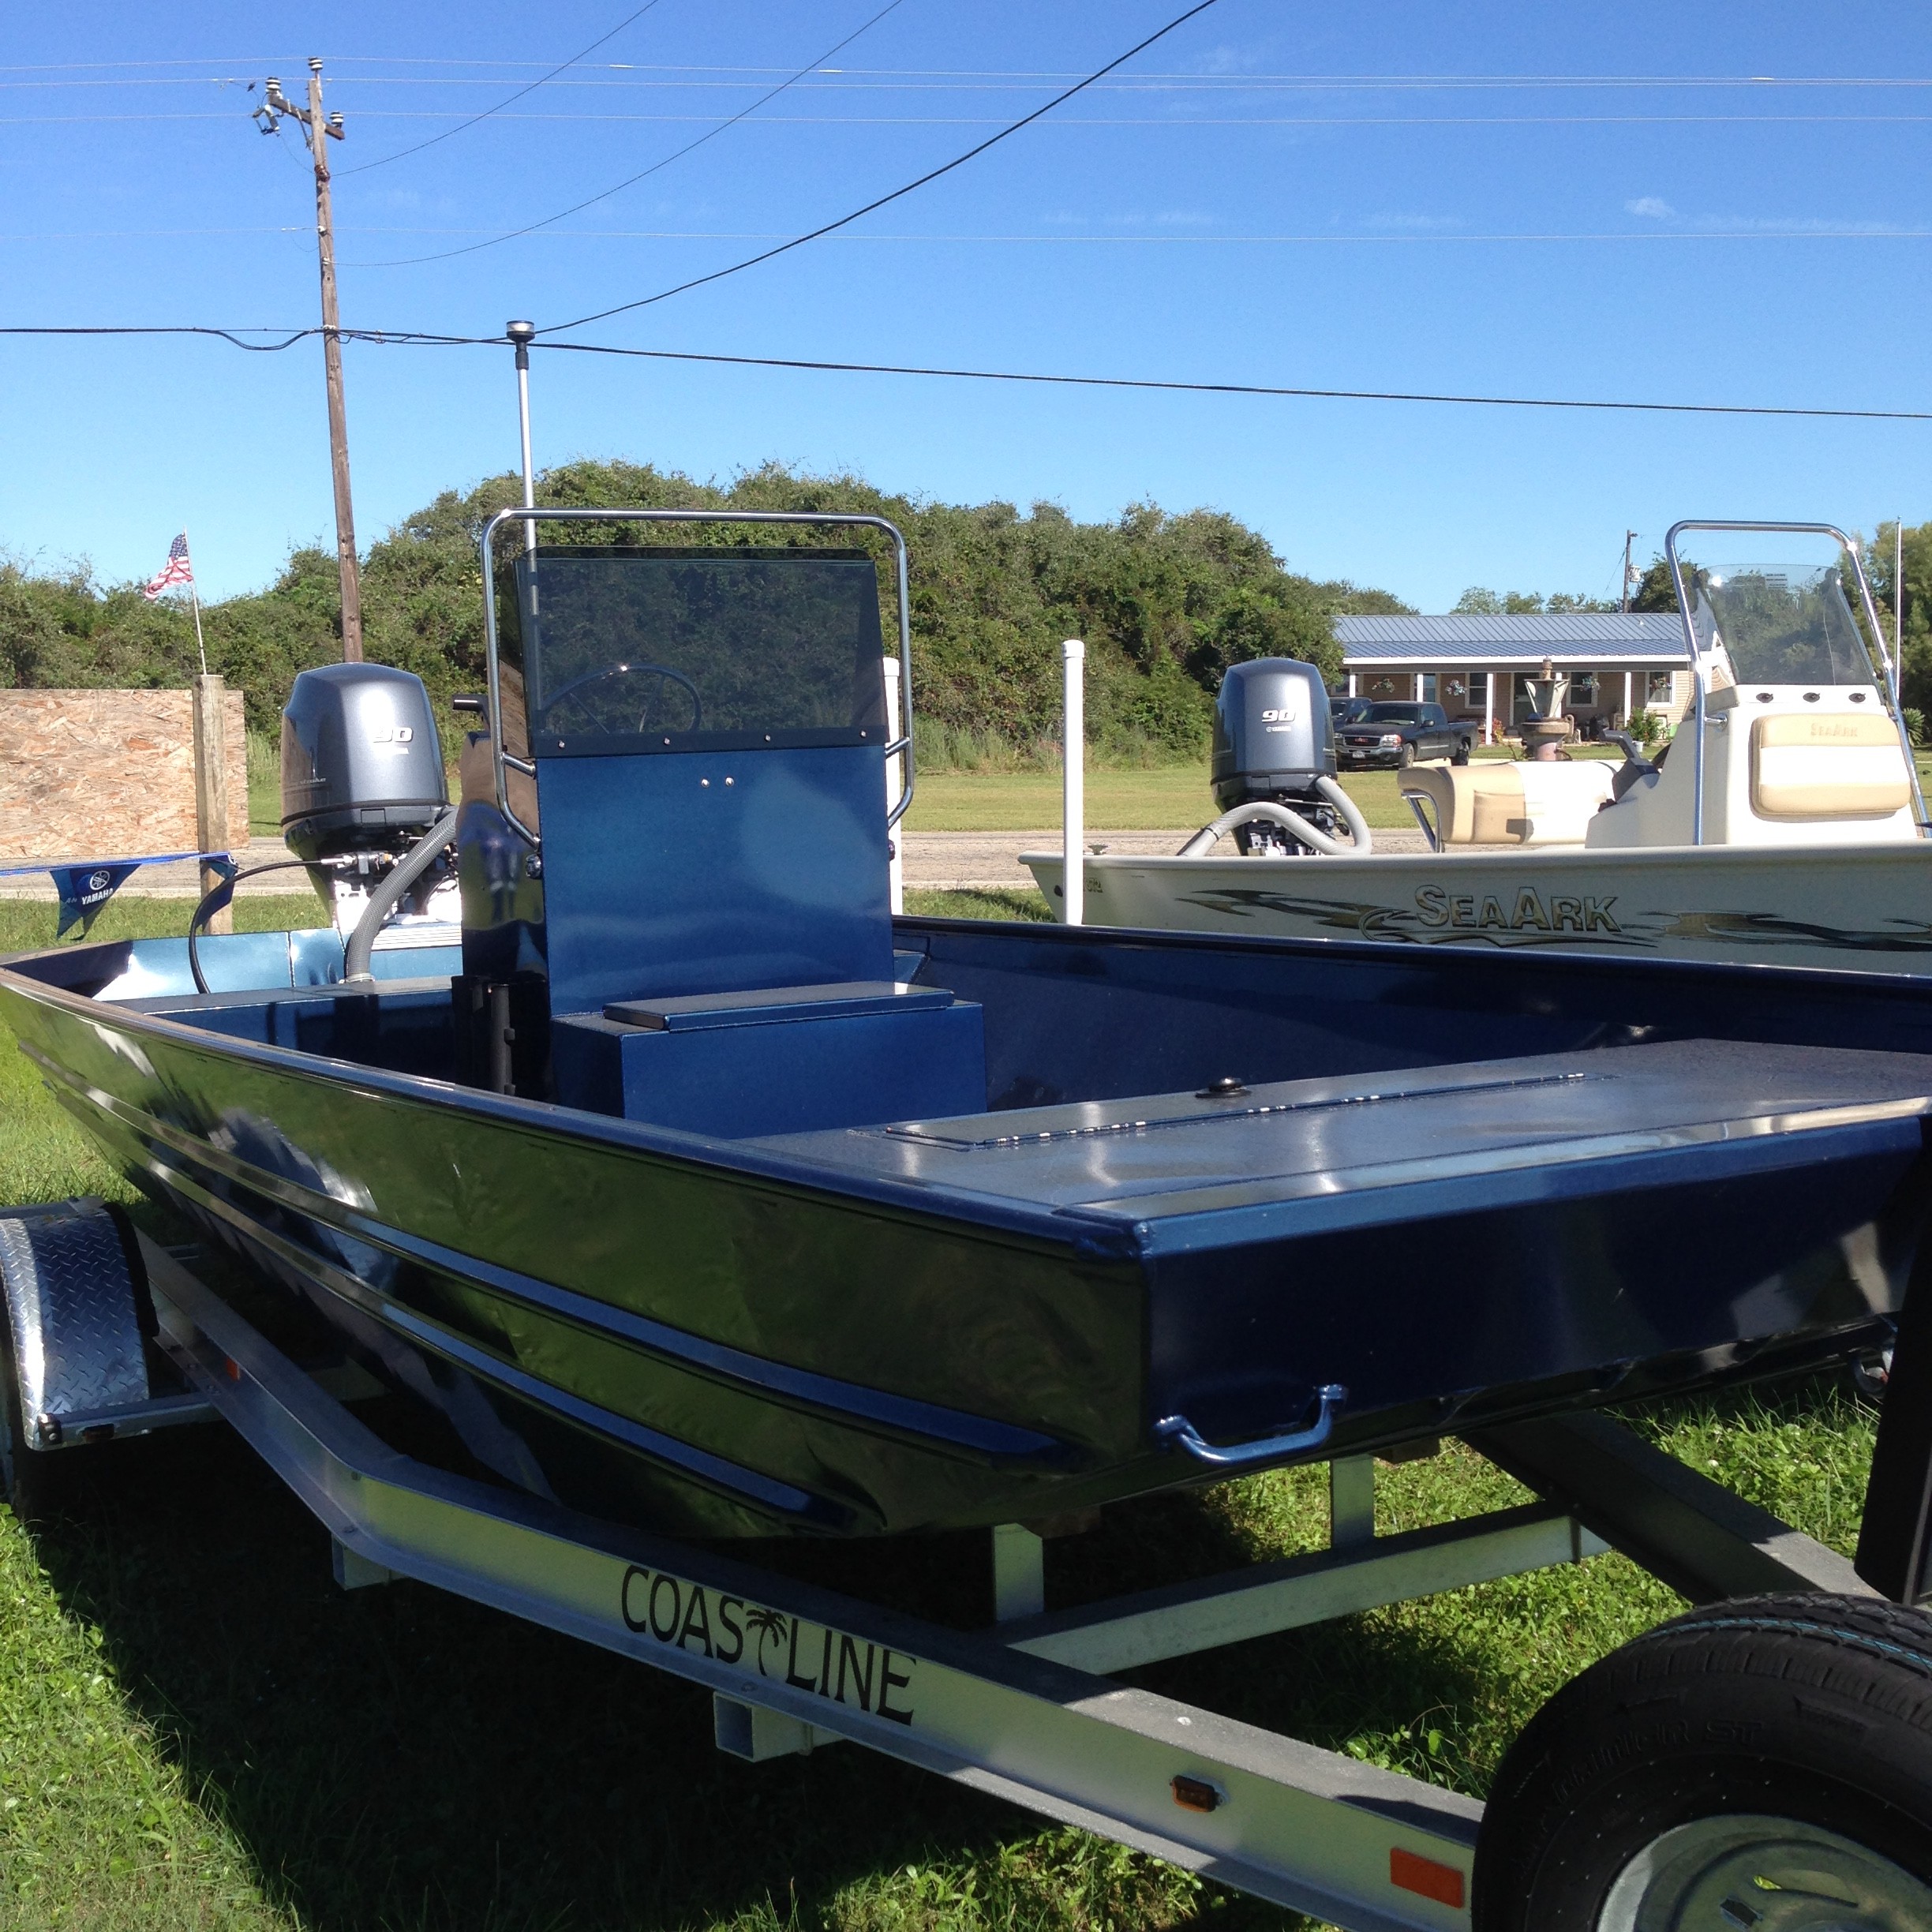 Weld craft 18 70 Flat bottom in Blue with Yamaha F90 4 stroke outboard Coastline aluminum trailer boat has 52" front deck with flush mount lid